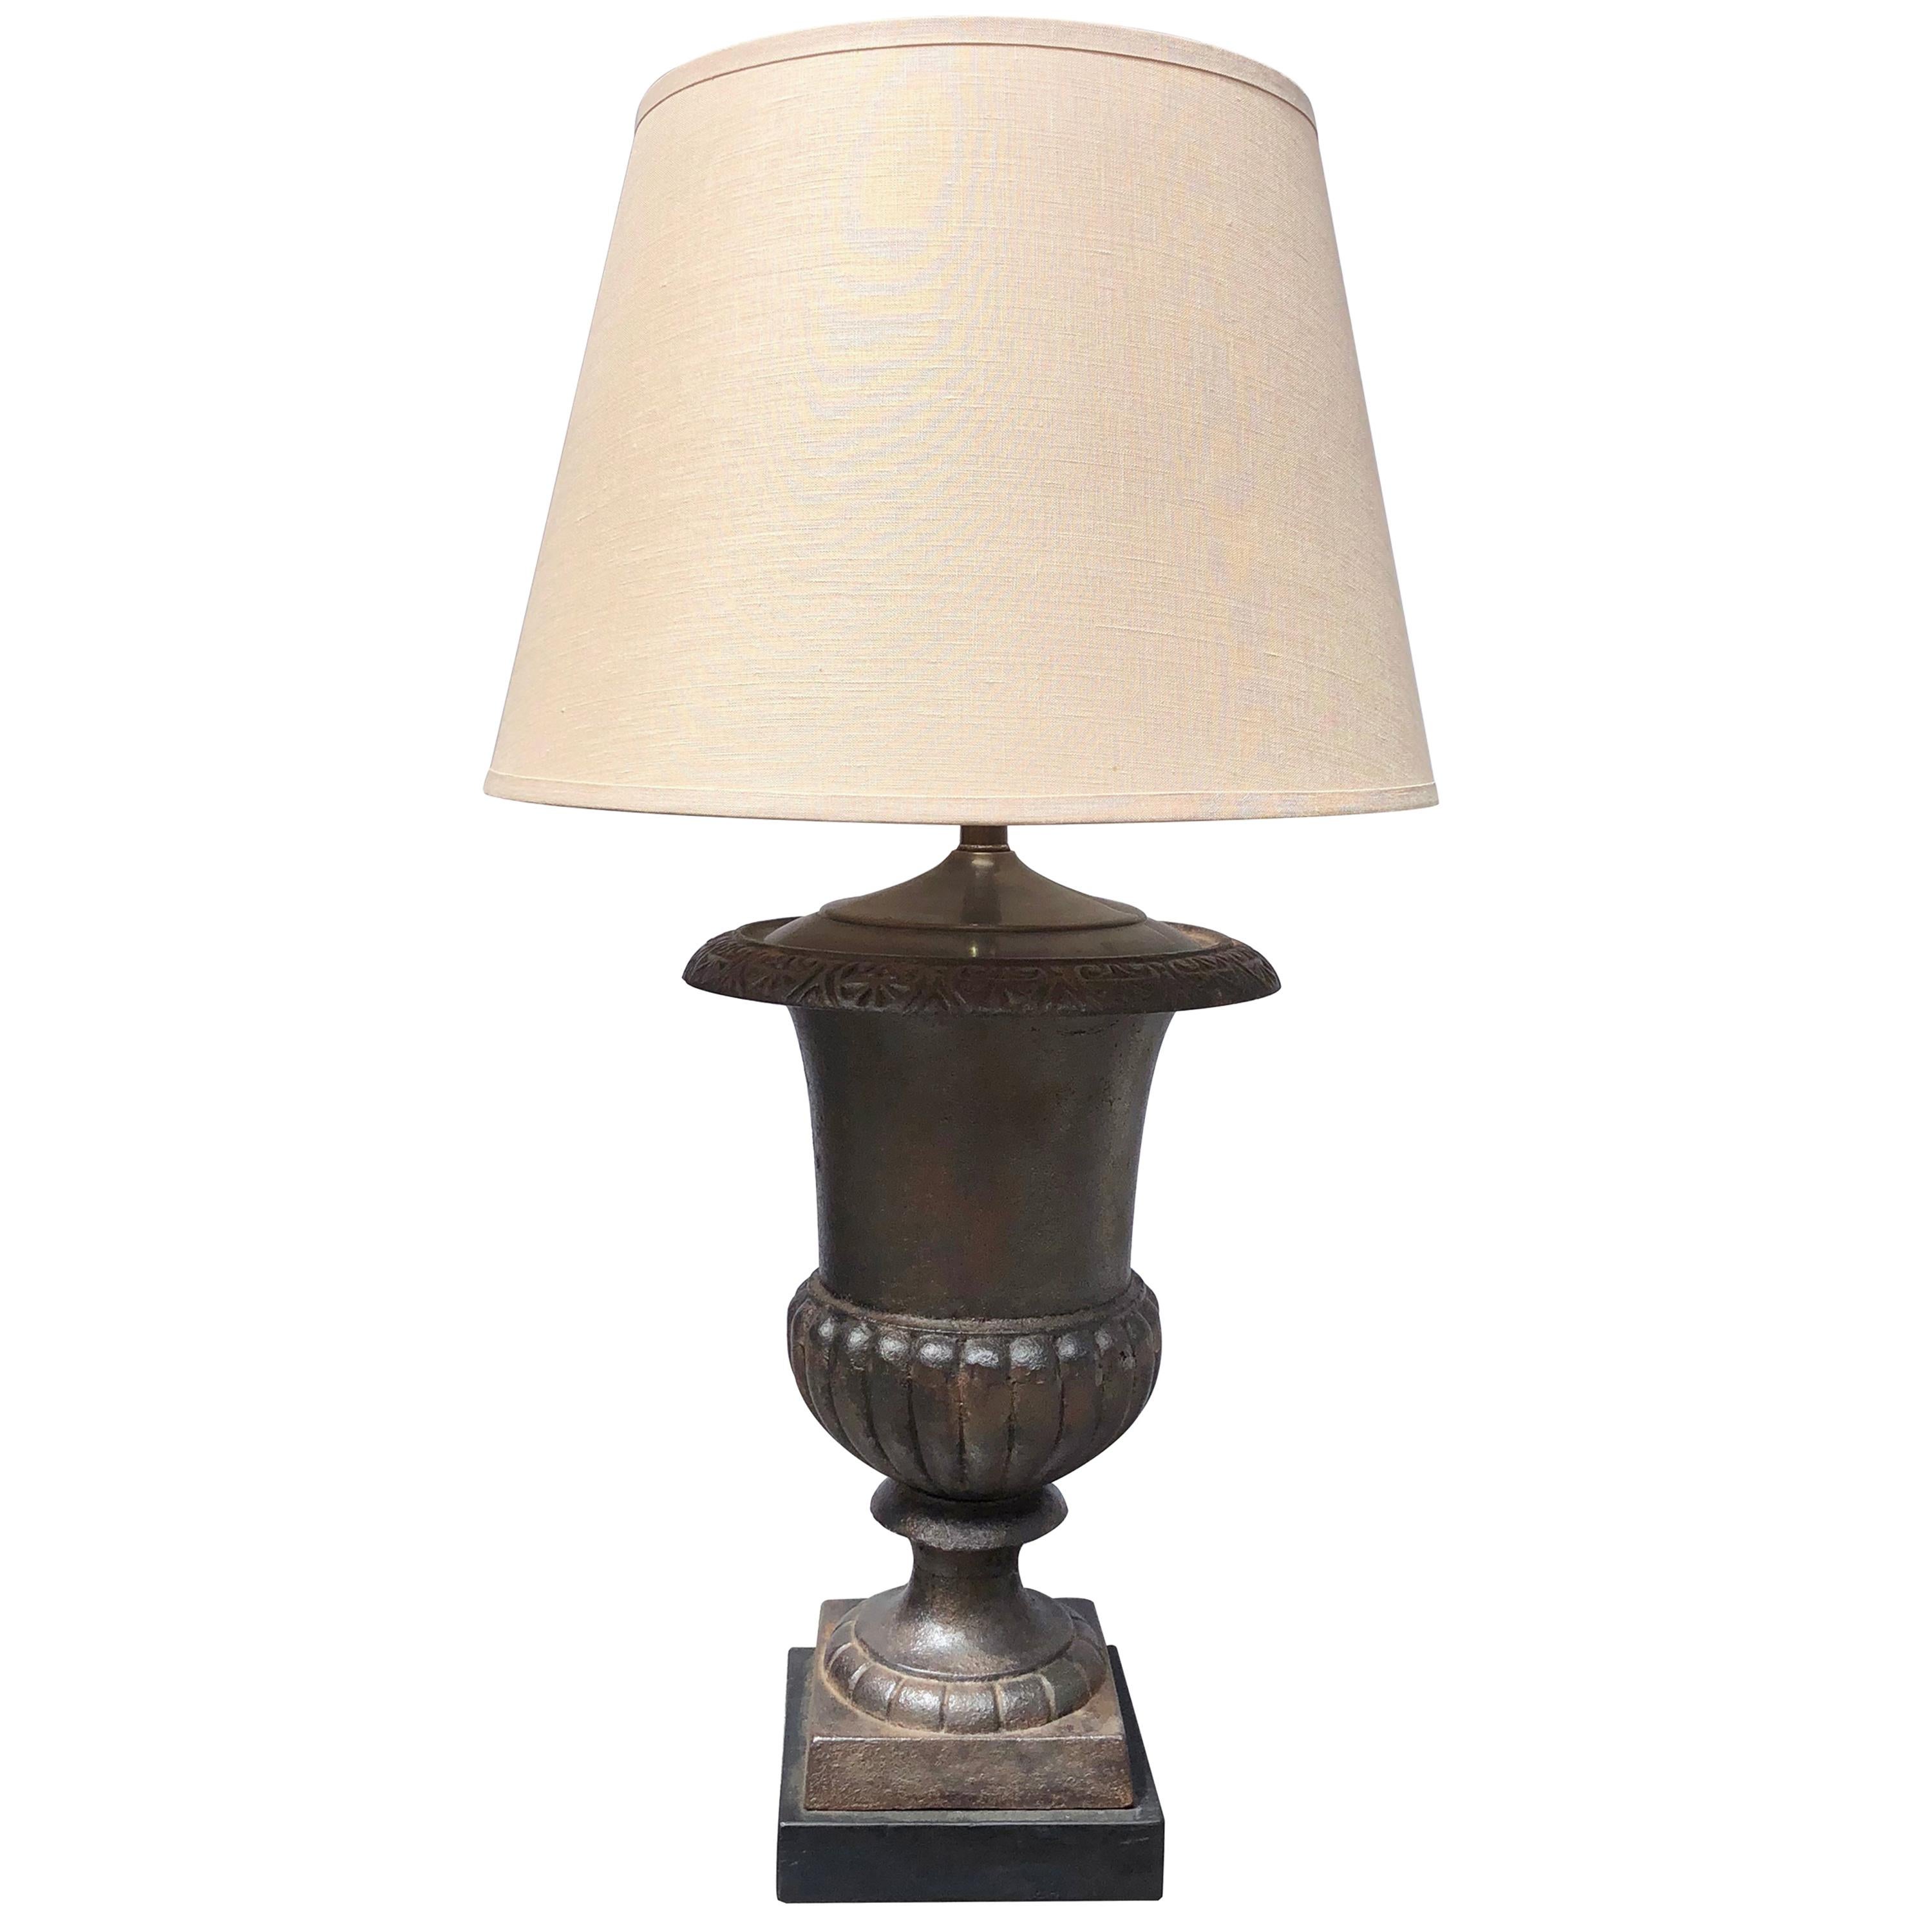 Boldly-Scaled French Steel-Brushed Iron Campagna Urn Now Mounted as a Lamp